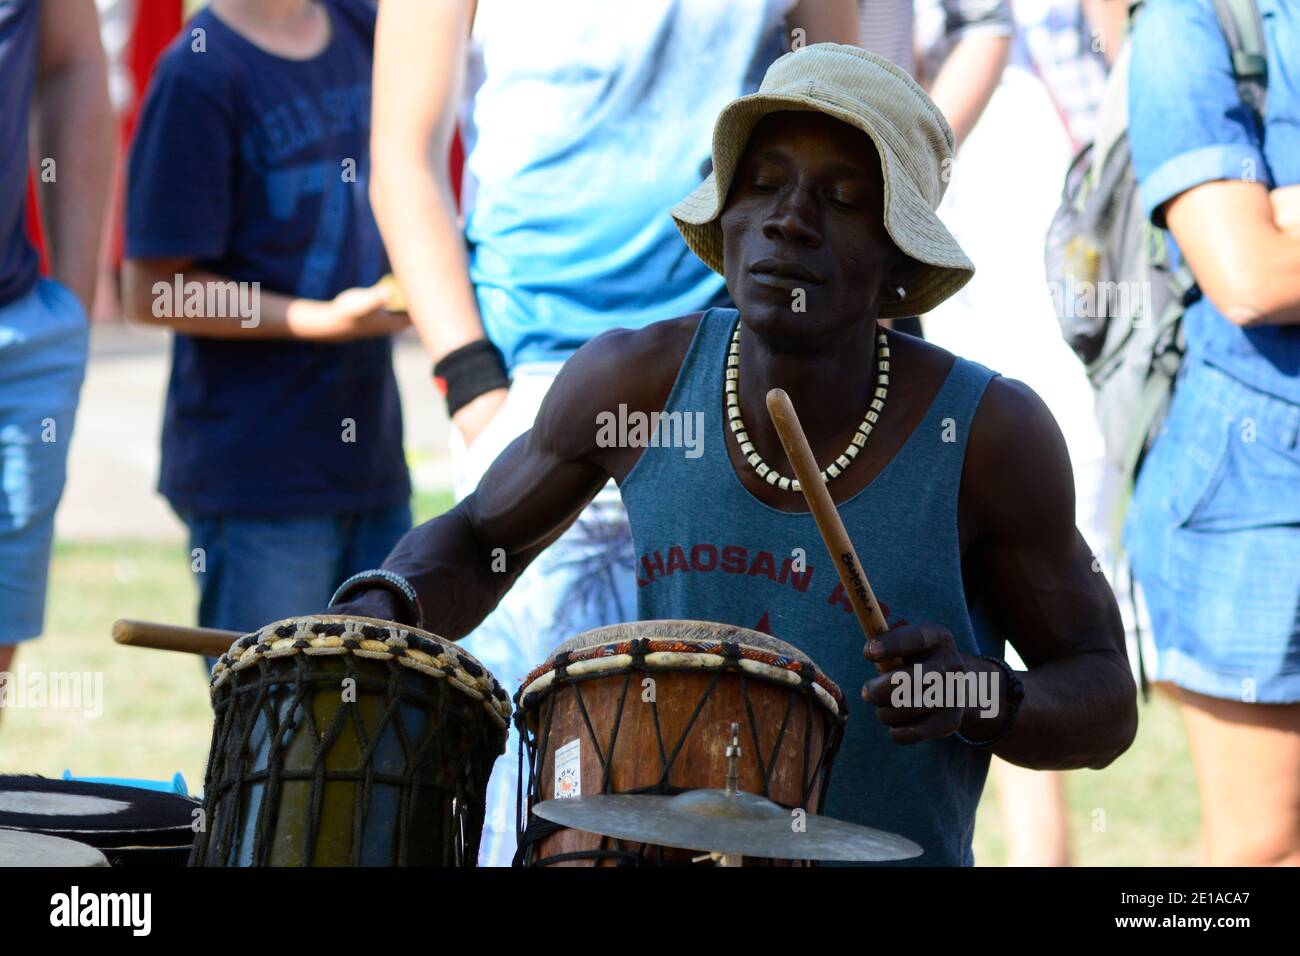 Vienna, Austria. August 07, 2016. Impressions from the 2016 festival season on the Danube Island in Vienna. A man drums on the festival site. Stock Photo